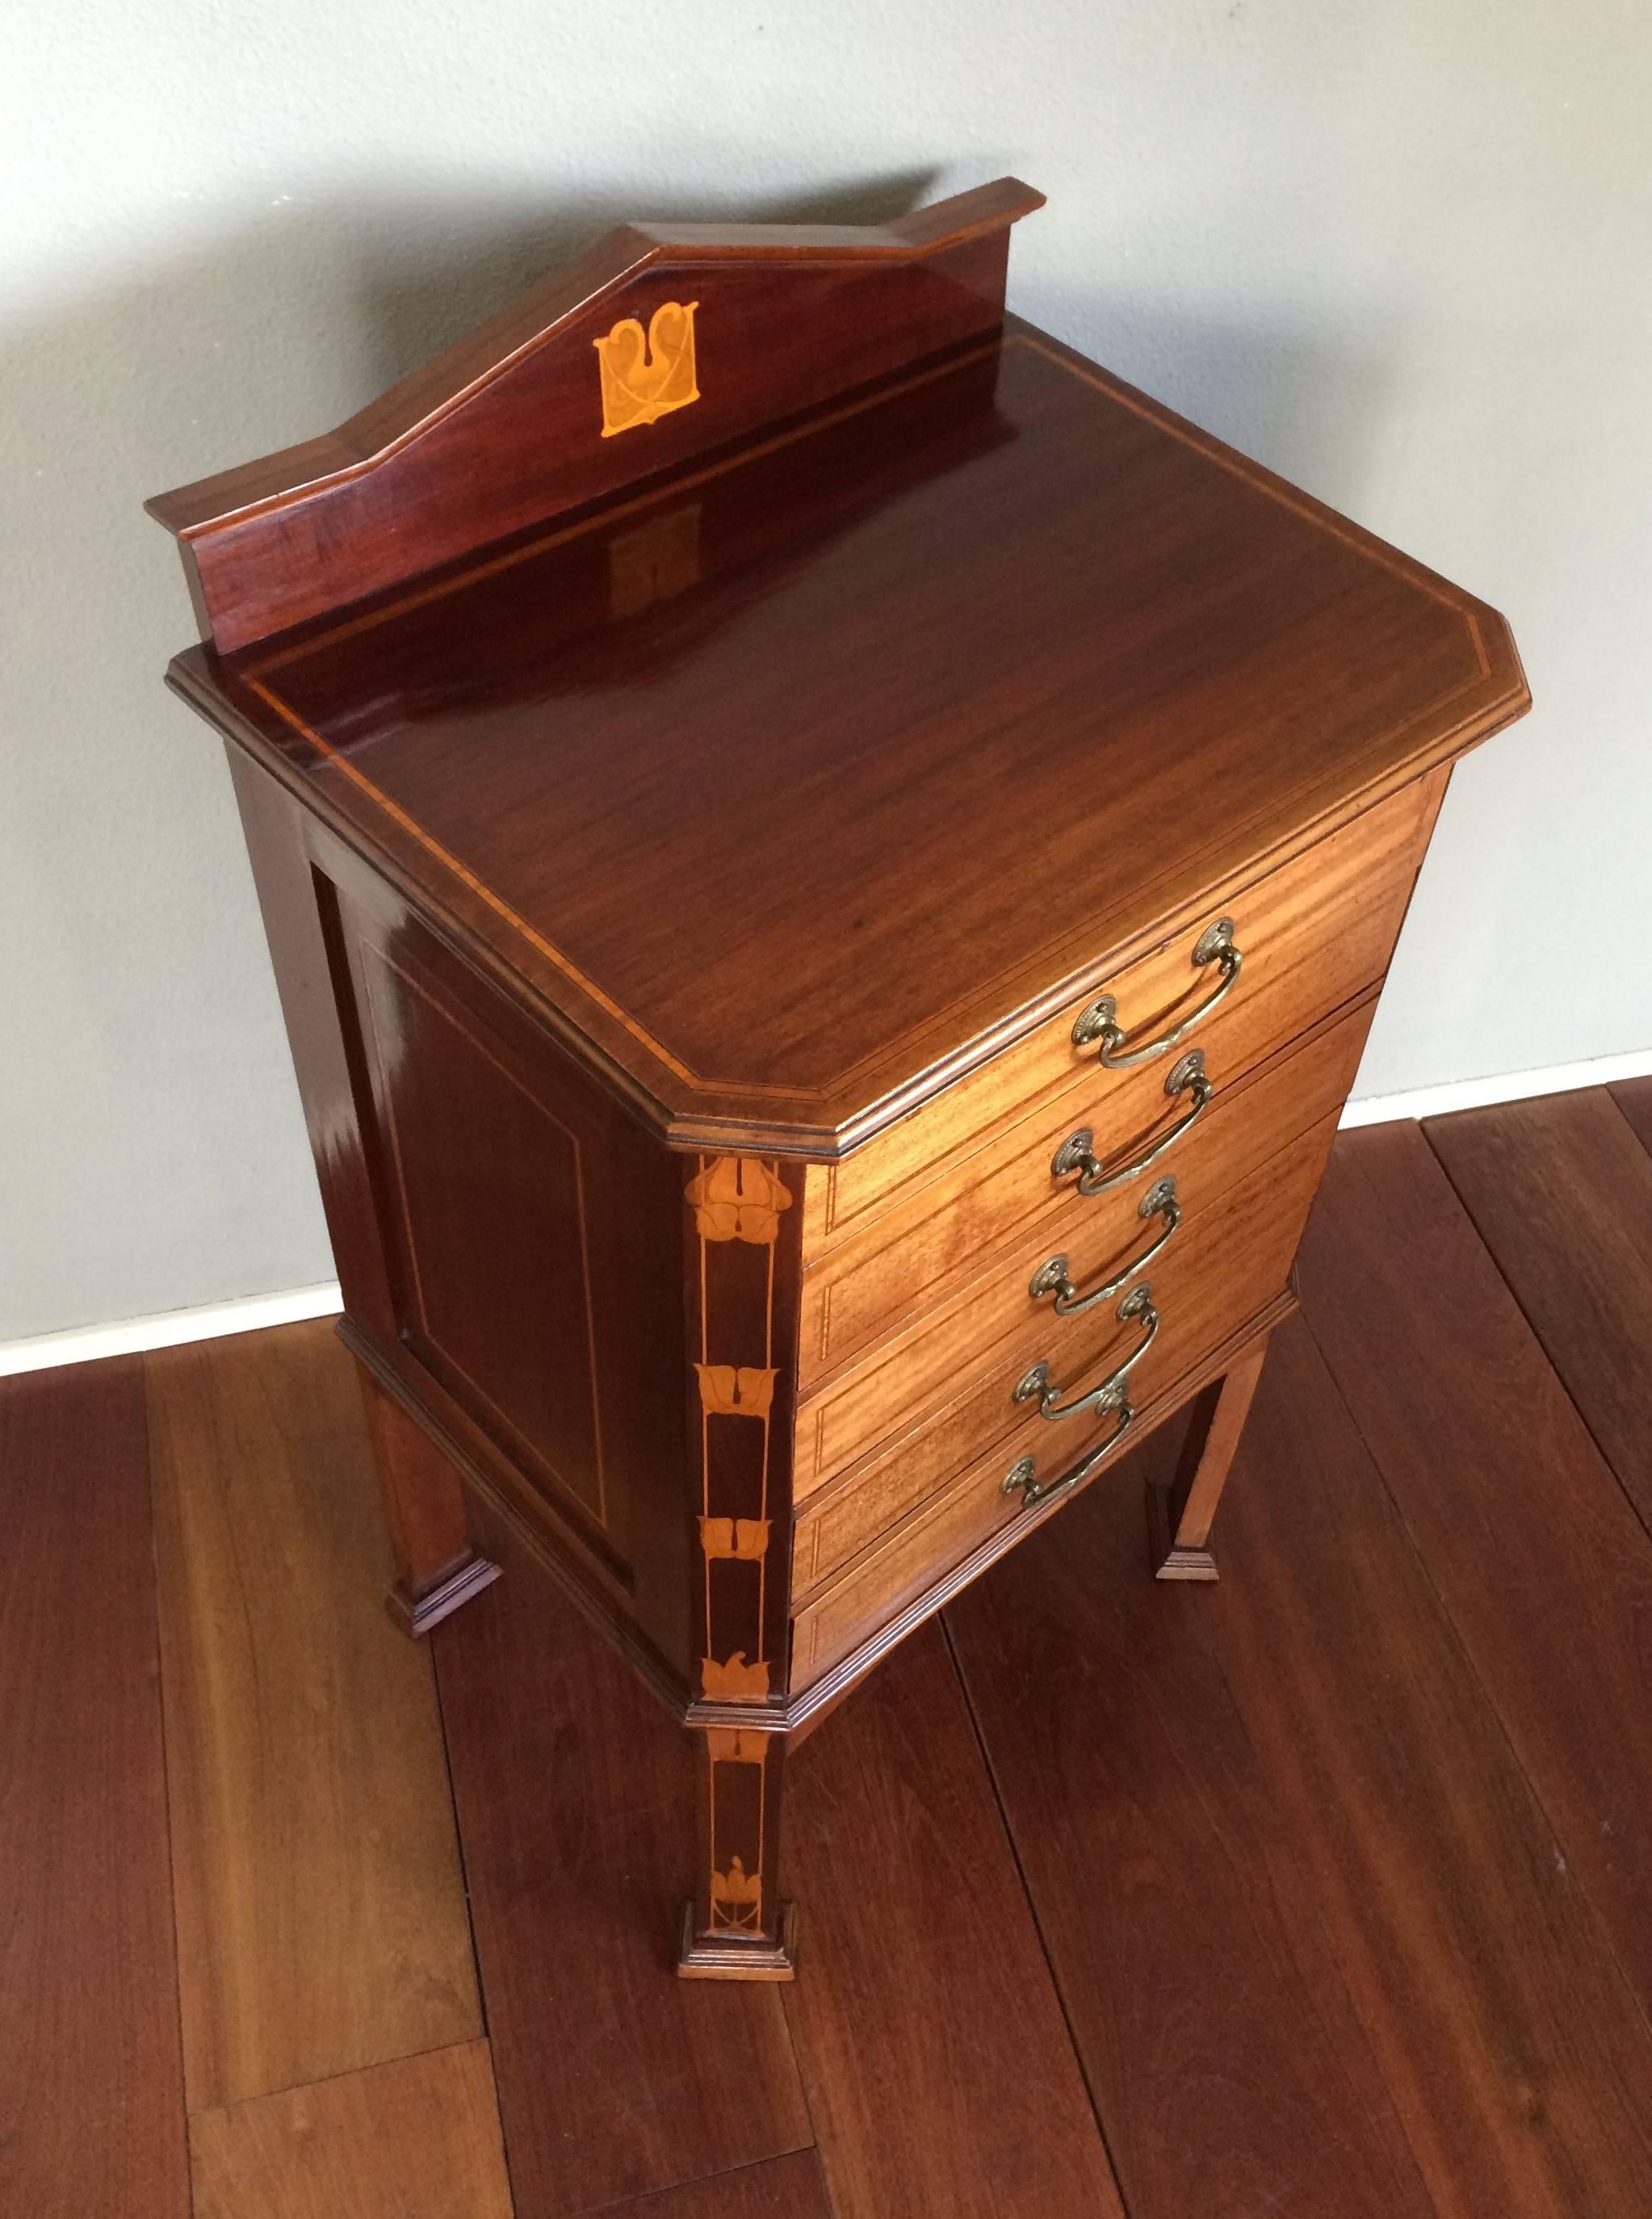 Beautifully designed AND executed filing cabinet with special drawers.

We could hardly believe our eyes when we first saw this rare and stunning little filing cabinet from the heydays of the British Arts and Crafts period. The first thing that